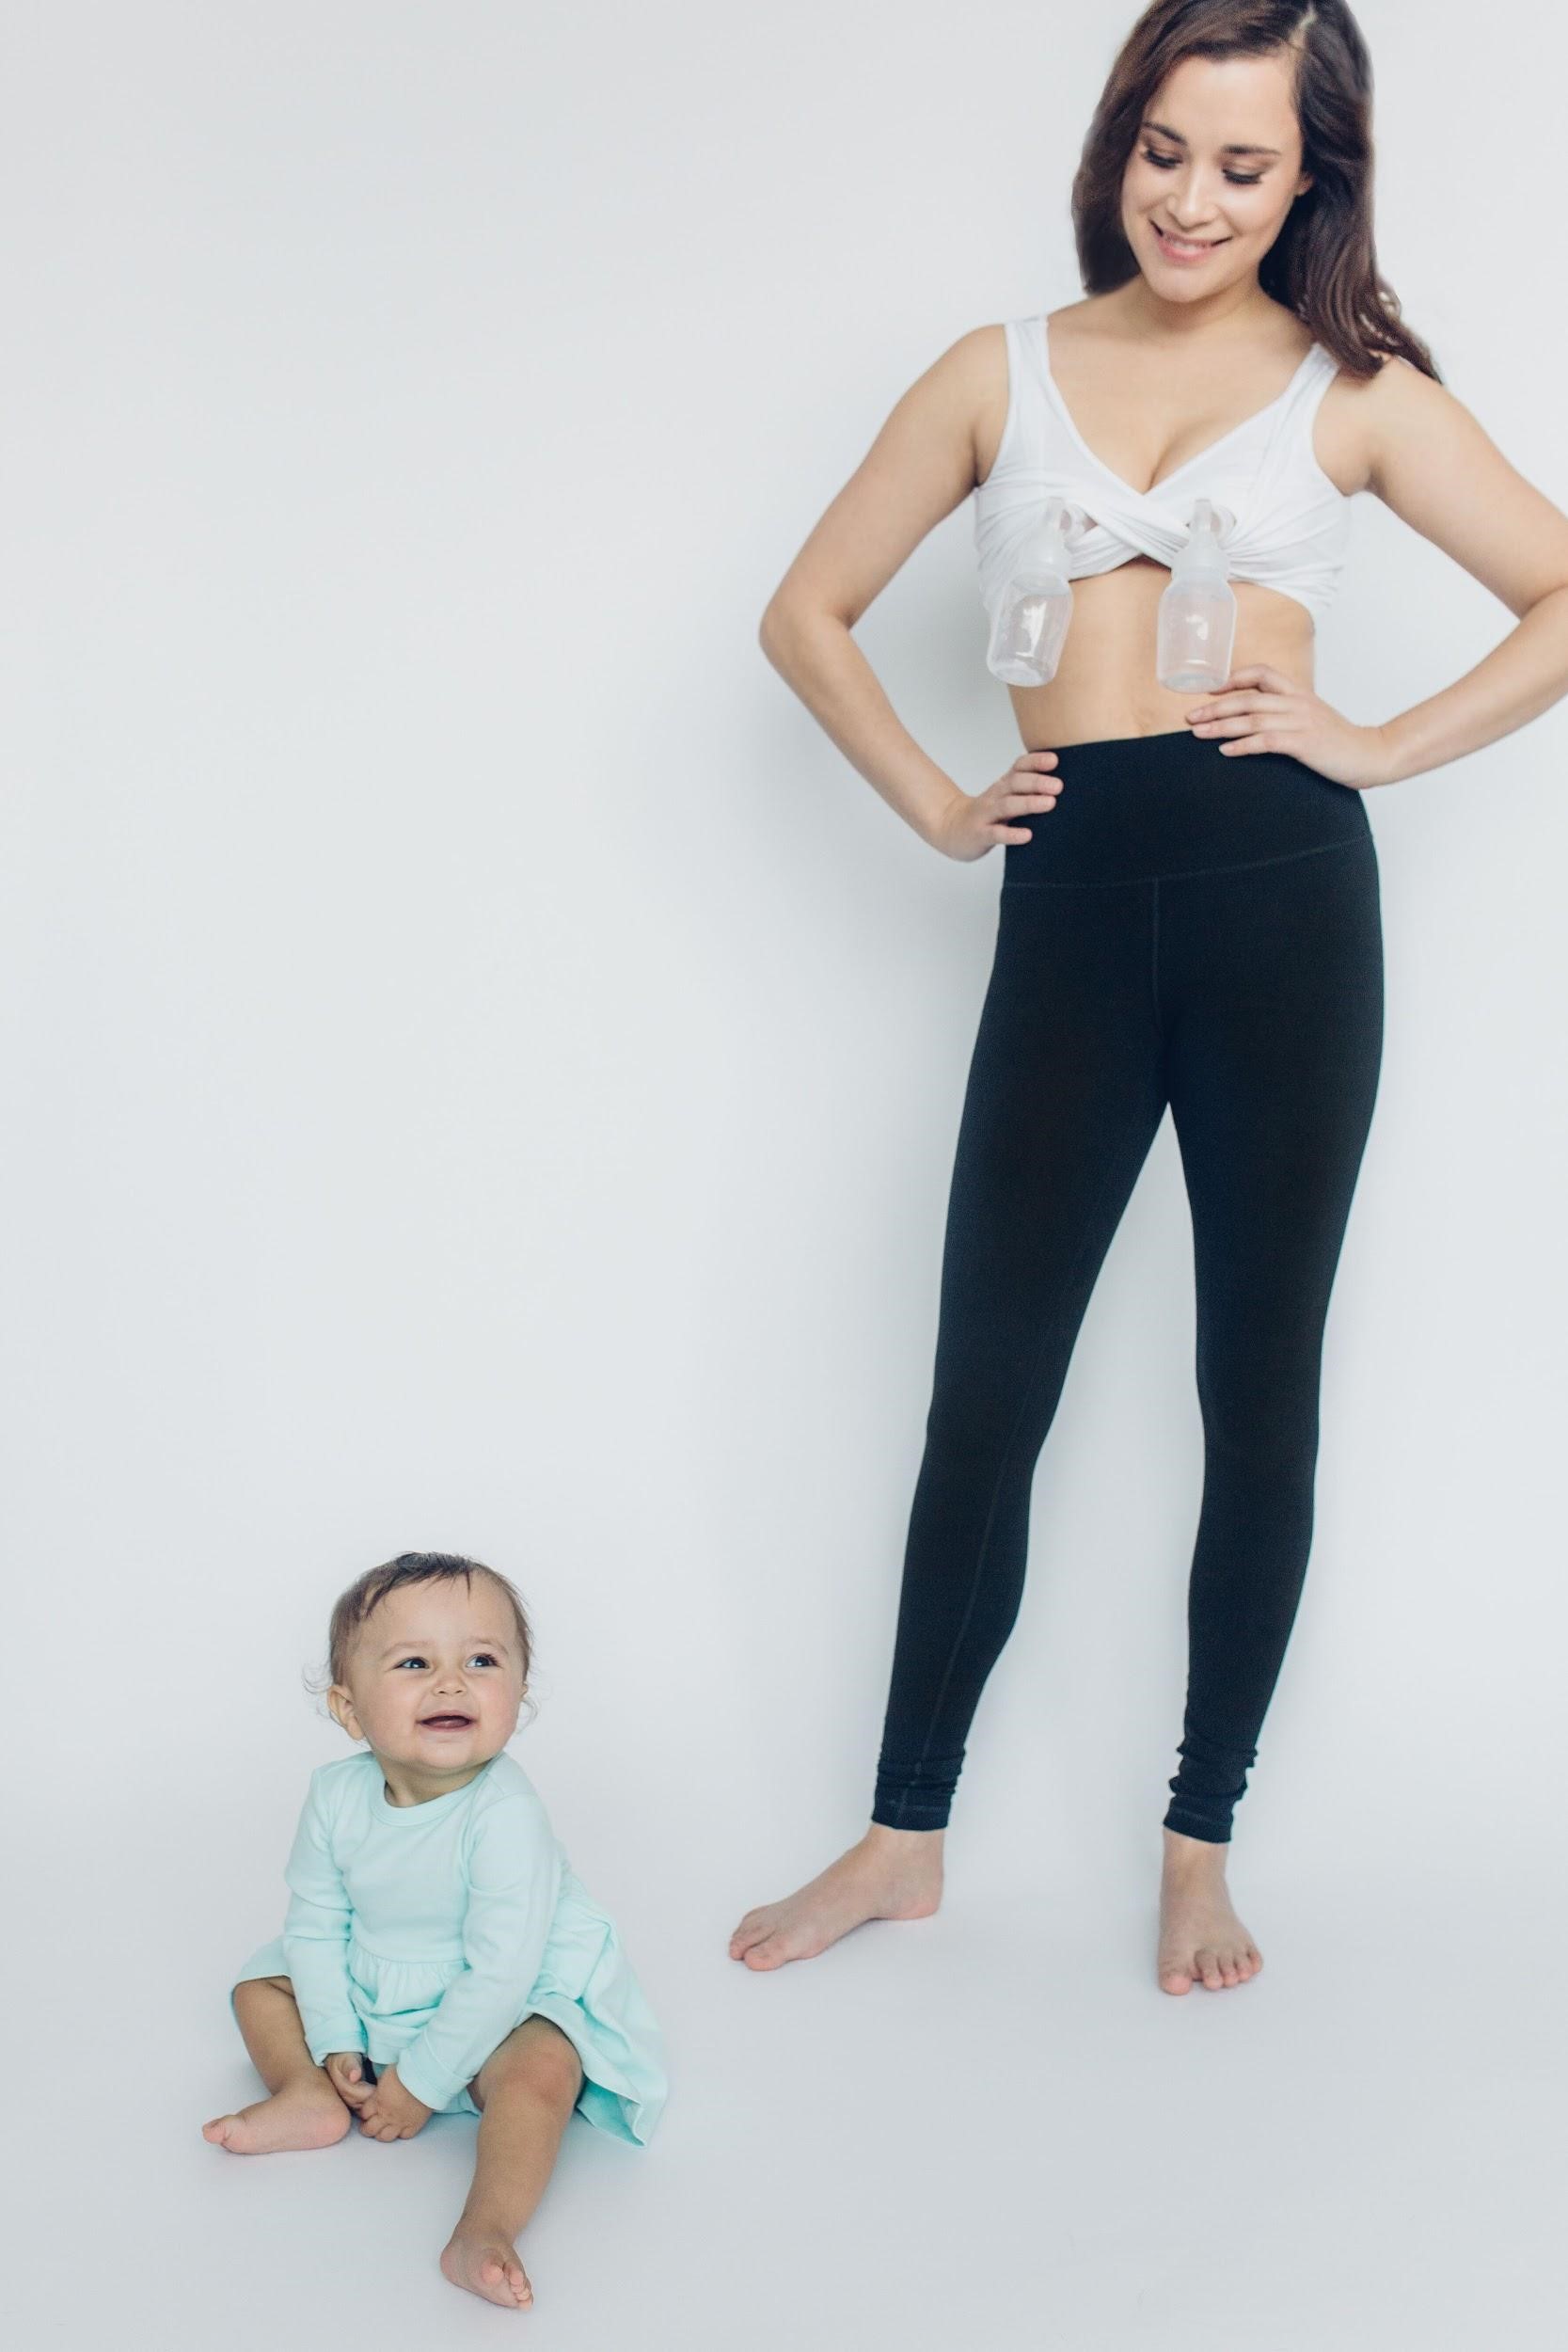 Meet the New Bra That Is Making Nursing and Pumping Easier - Mom Blog  Society